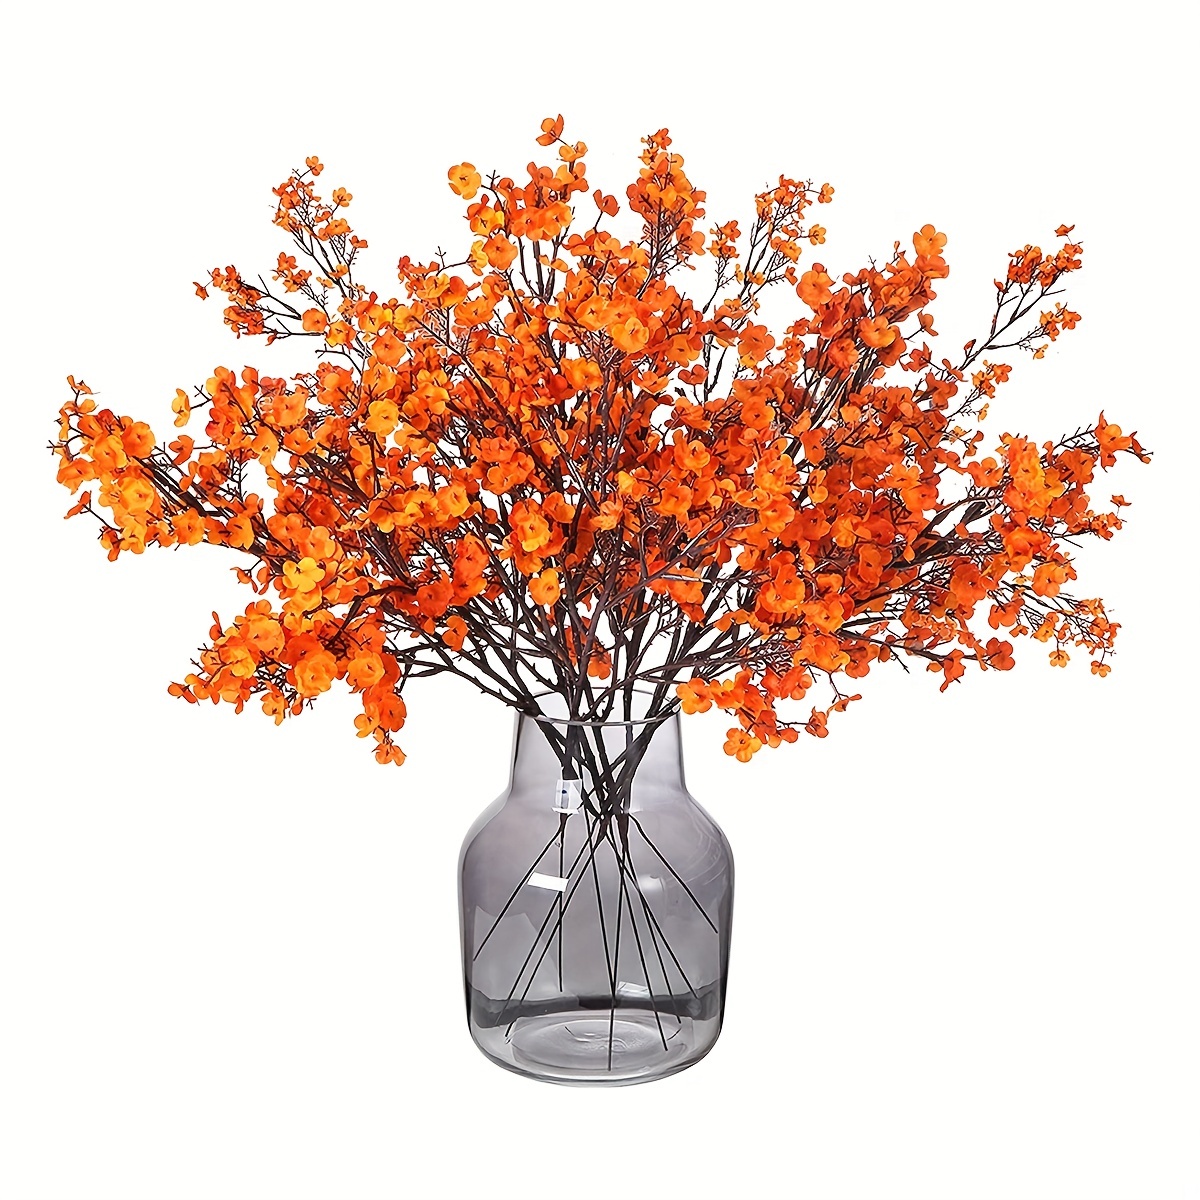  Sggvecsy 15 Pcs Babys Breath Artificial Flowers Gypsophila  Bouquets Bulk Real Touch Fake Silk Flowers for Home DIY Floral Arrangement  Table Centerpiece Fall Autumn Decoration (Fall Orange) : Home & Kitchen